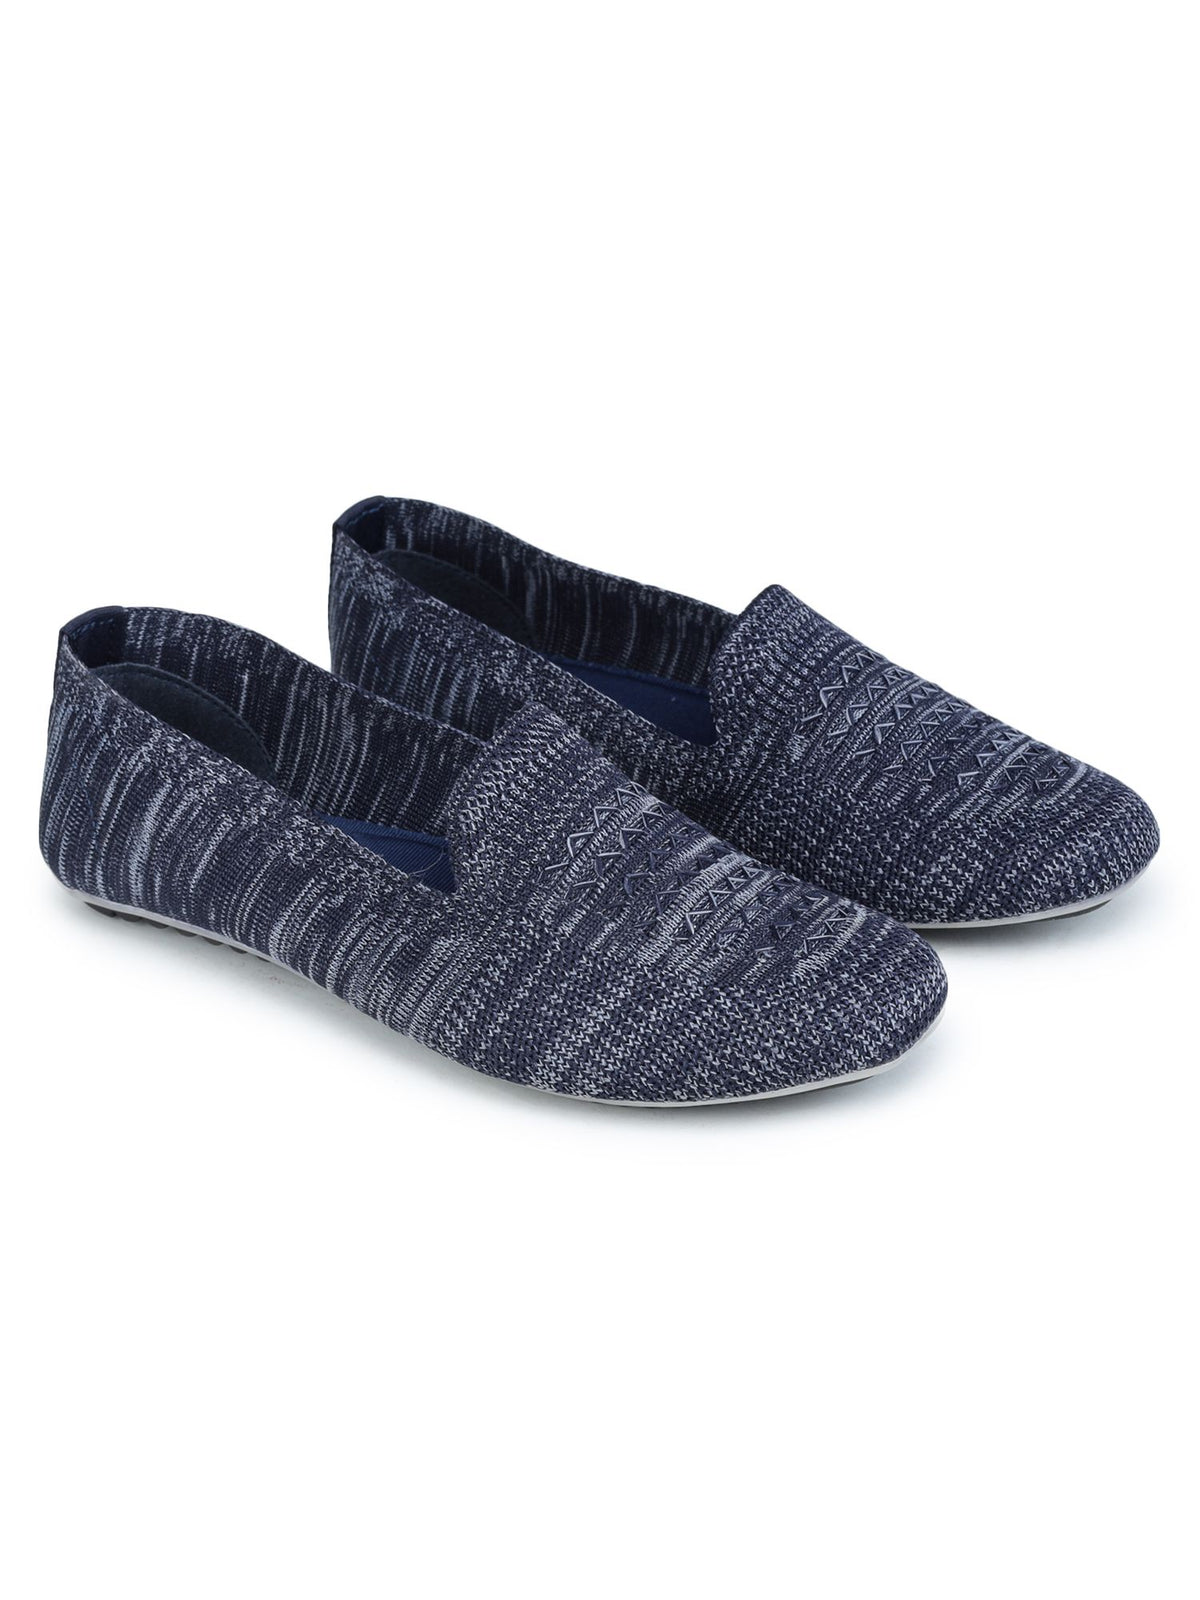 Blue Solid Textile Slip On Casual Bellies for Women